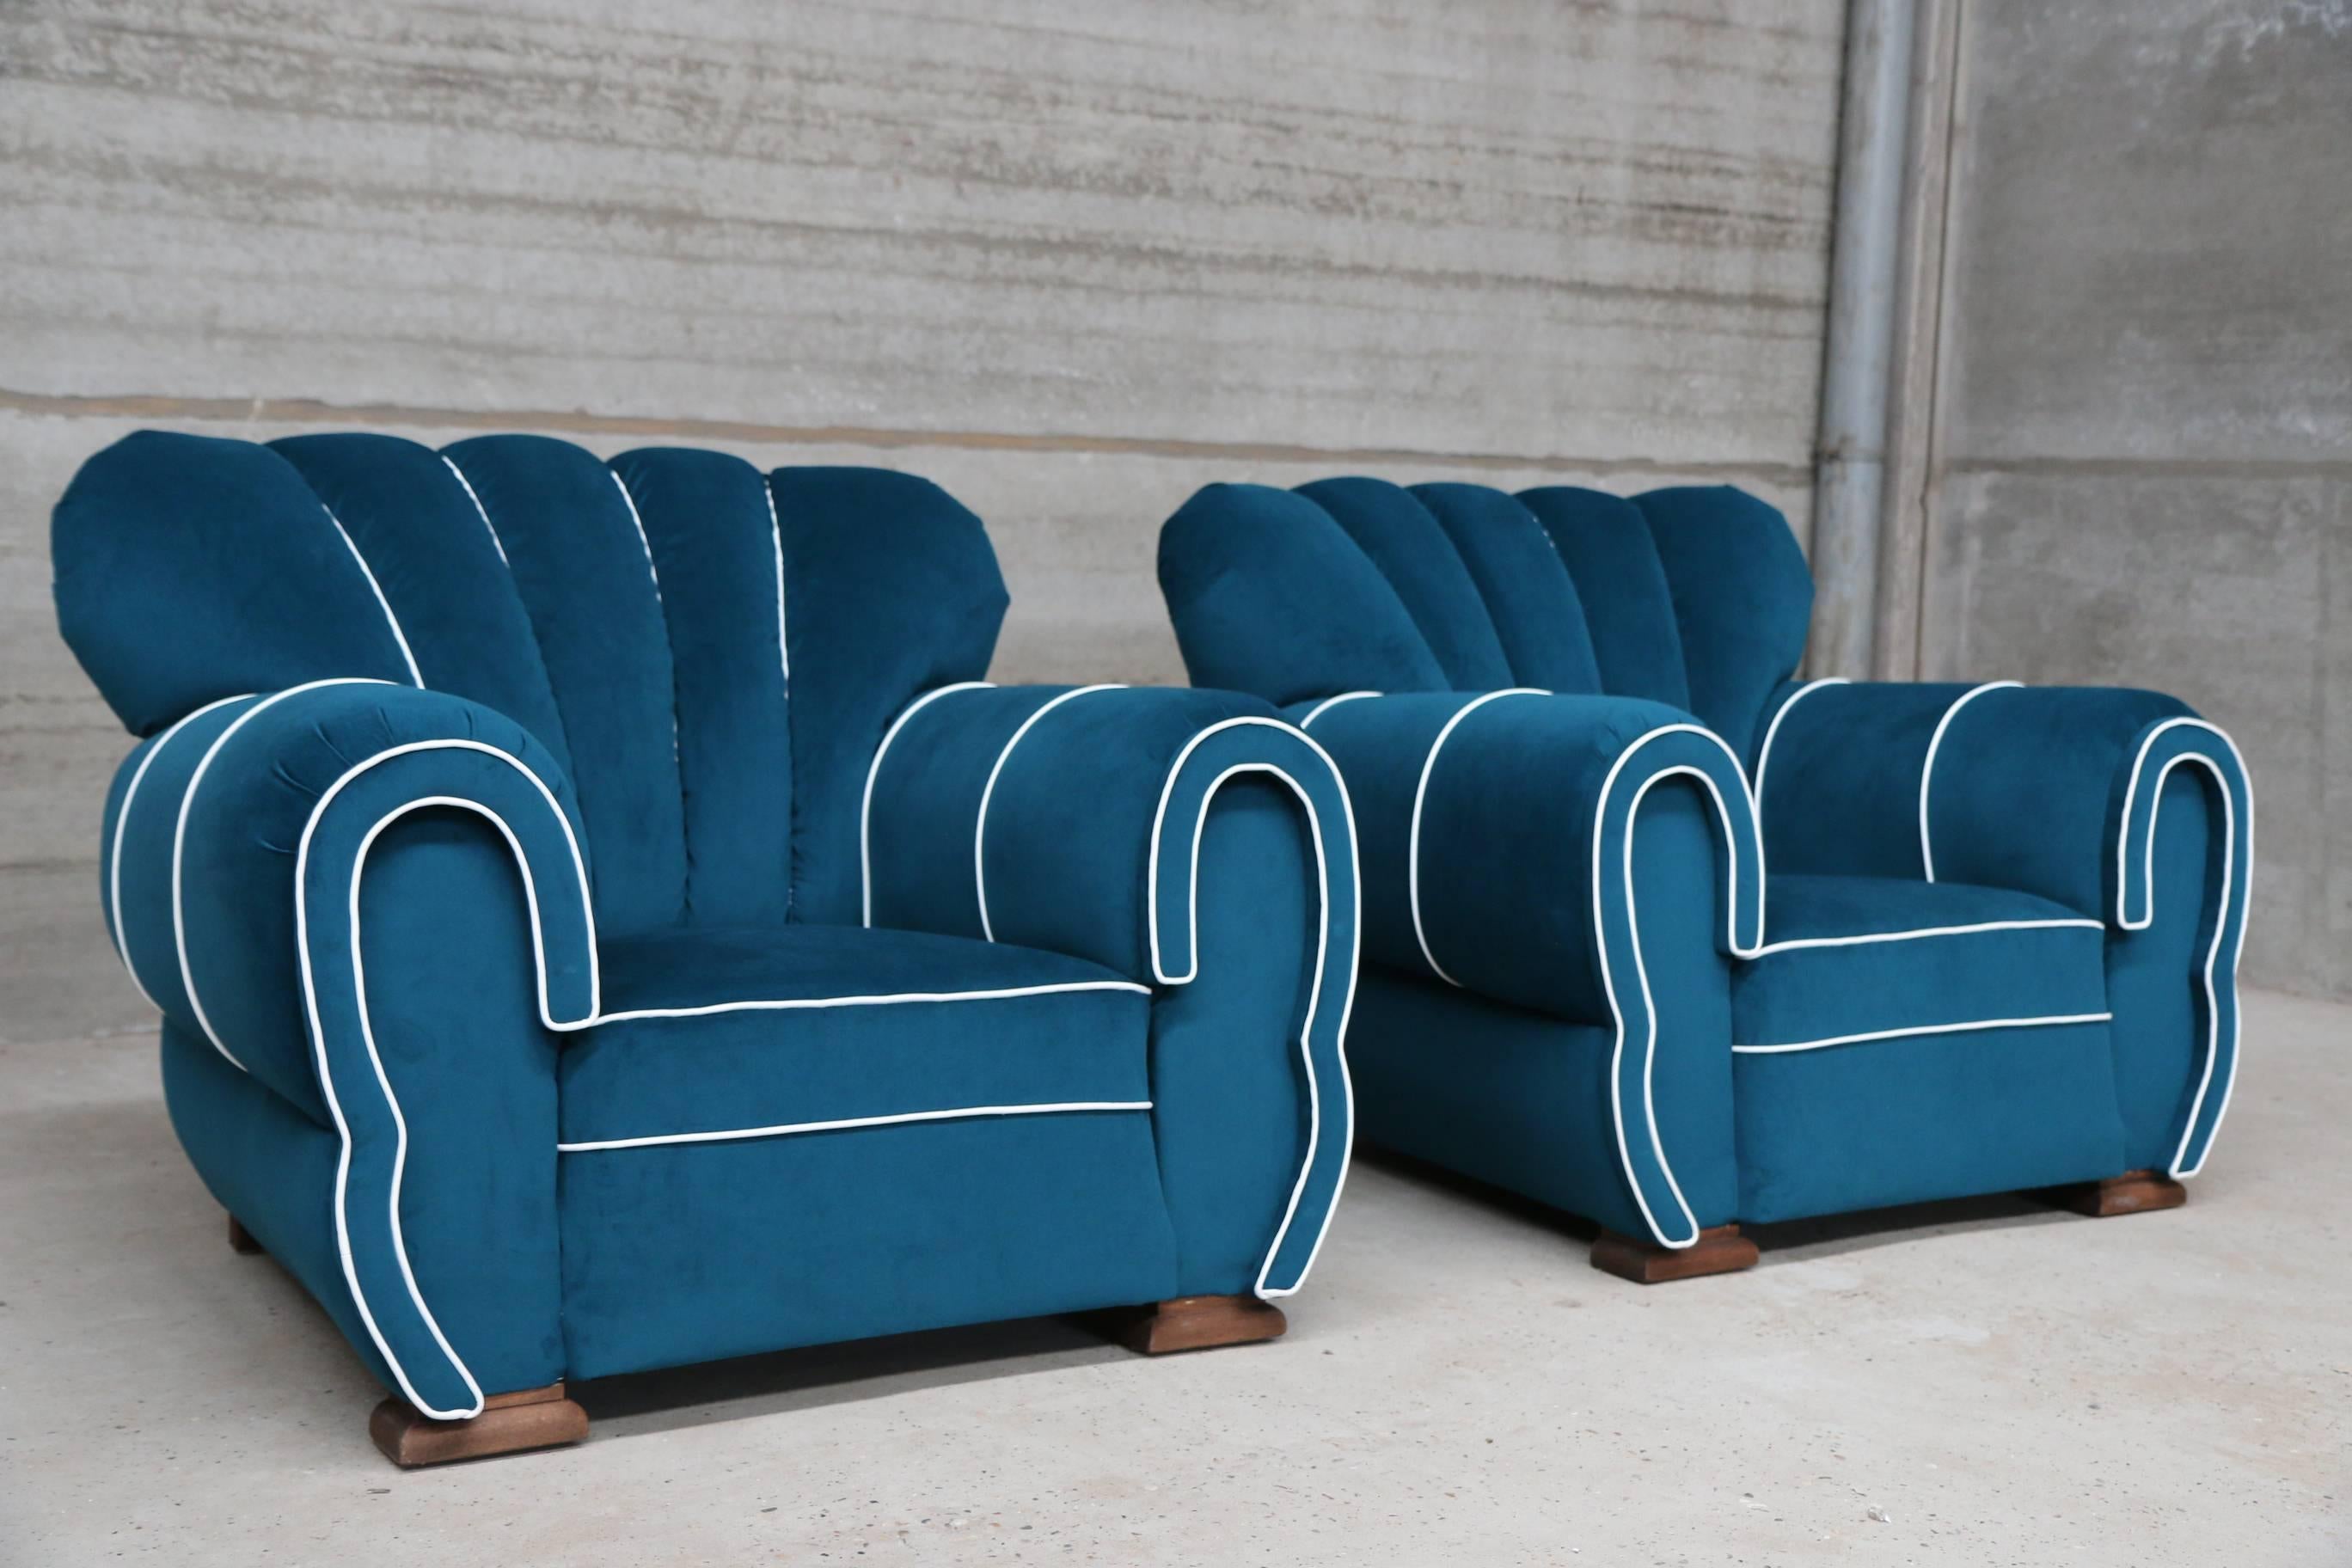 Pair of French 1937 Art Deco Bergères. Professionally restored in blue velvet by funkyvintage Belgium.
Very rare model, impossible to find. Probably by Pierre de la Londe and a design by Ruhlmann
Makes any interior looking the part.